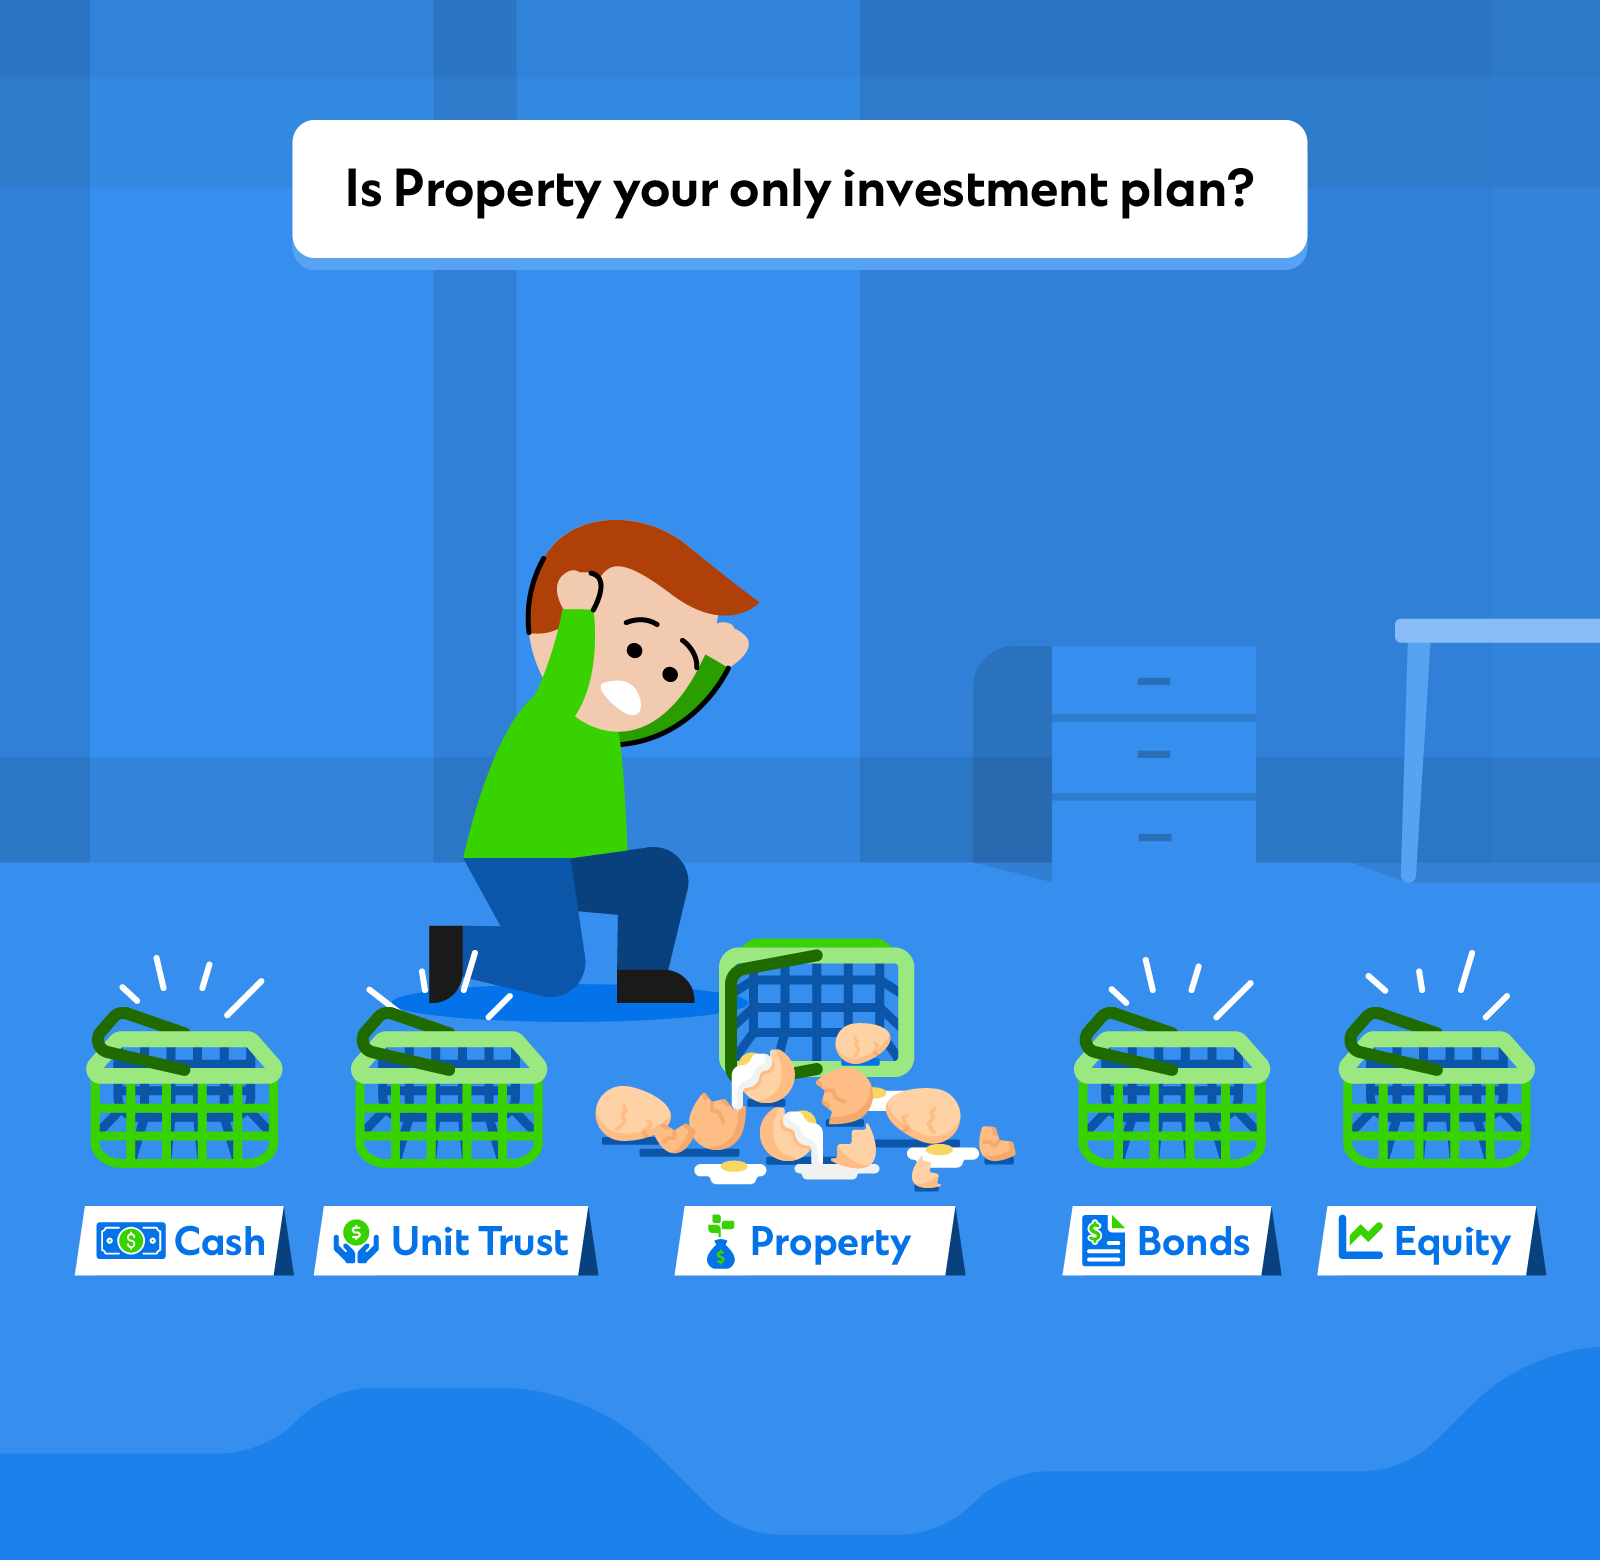 Build a diversified investment plan